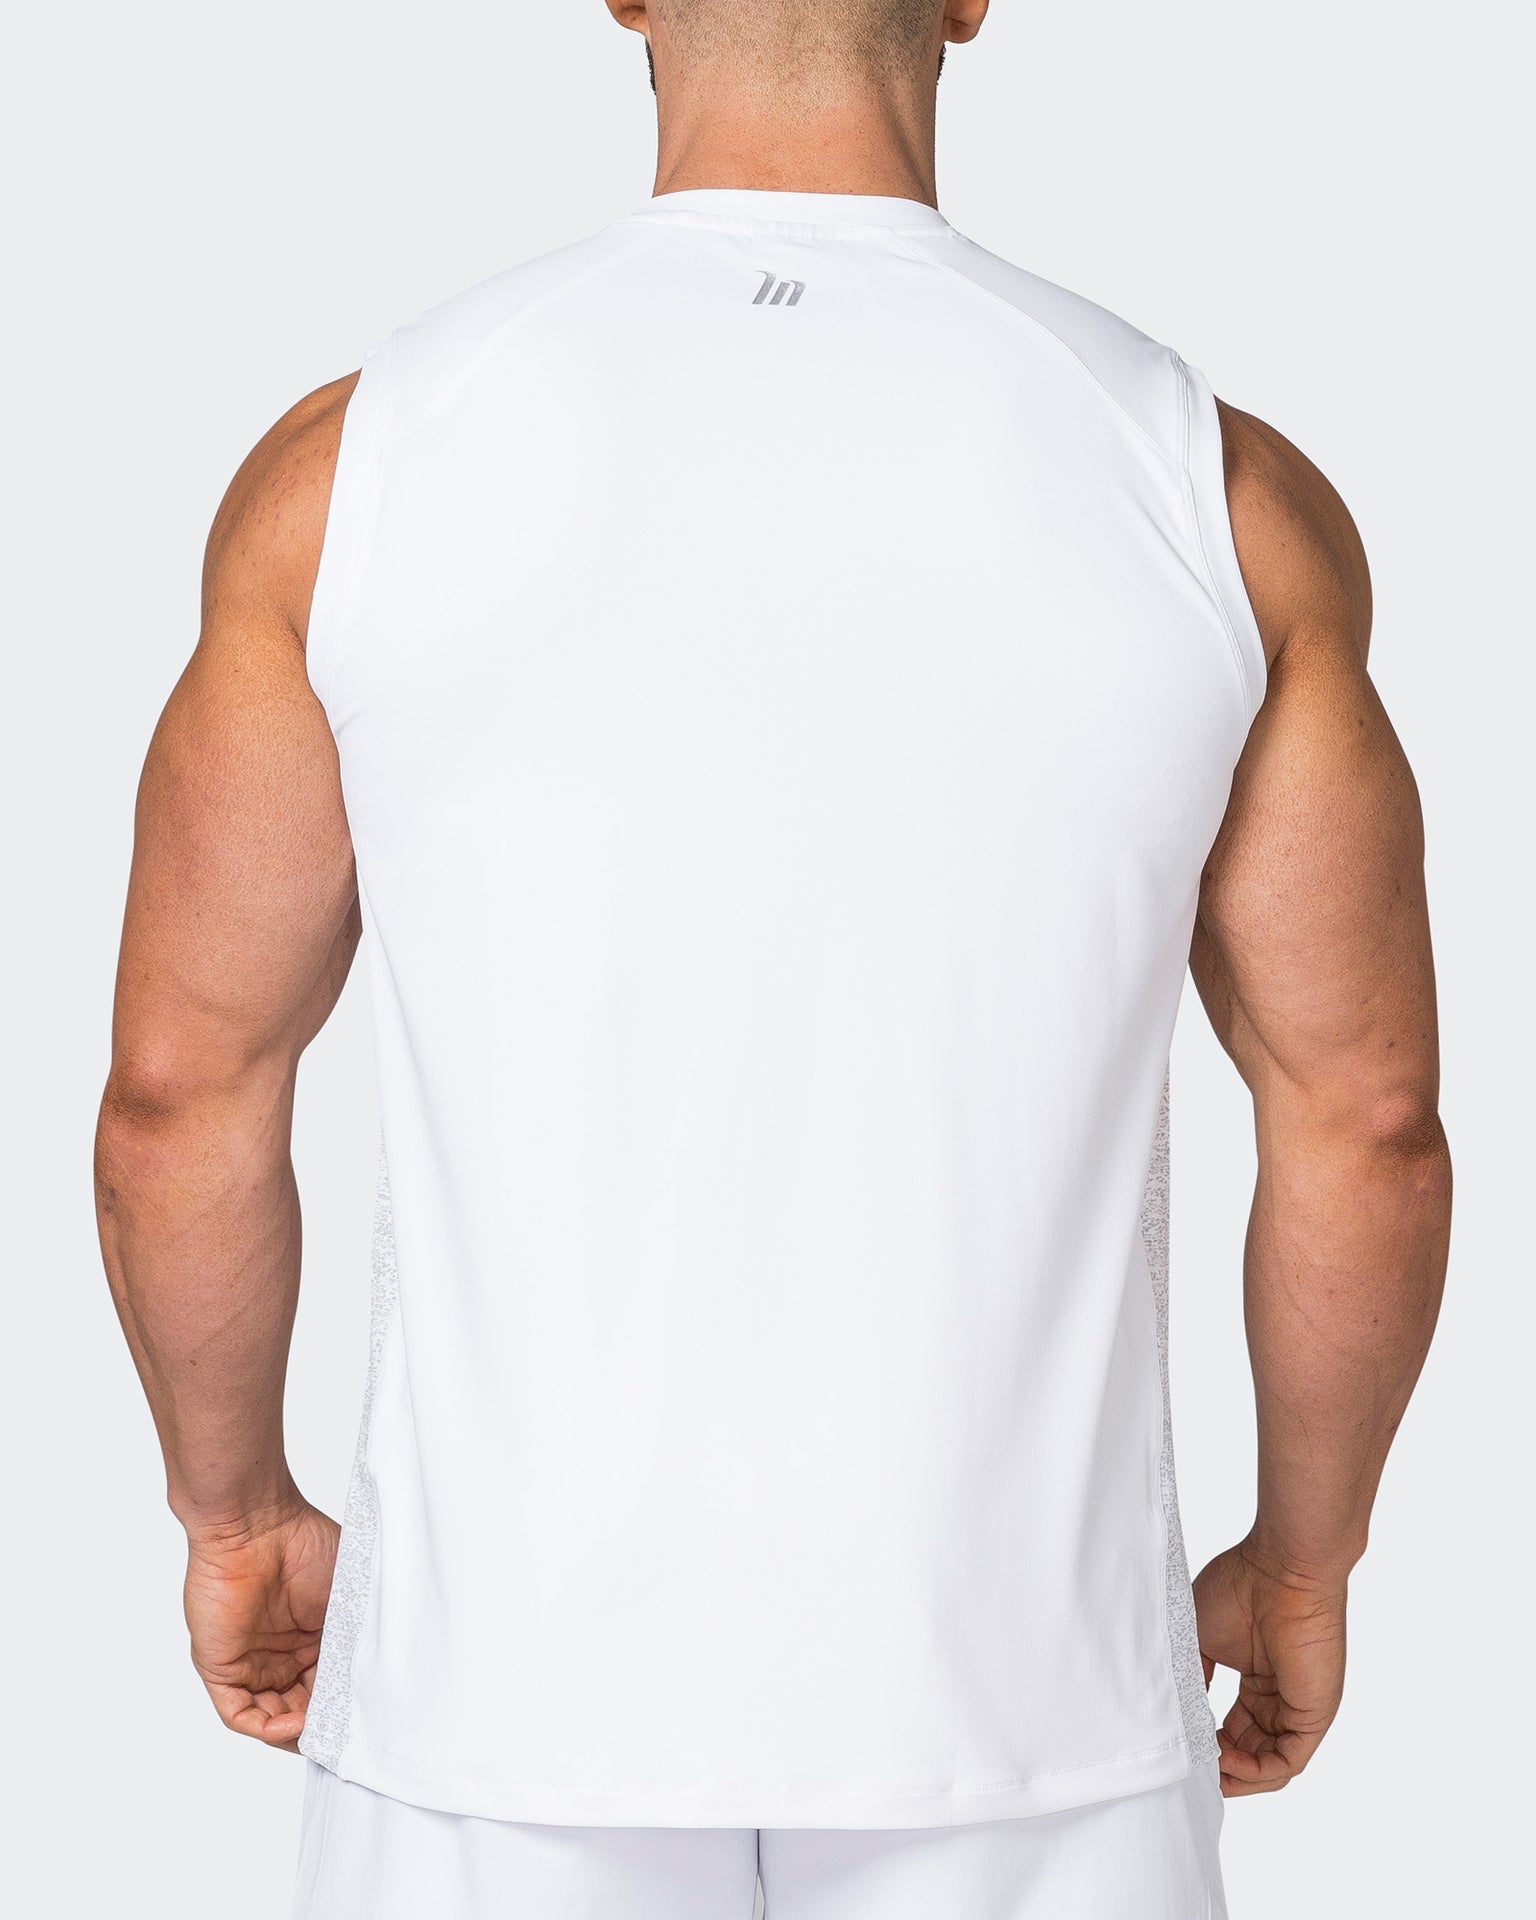 Muscle Nation Tank Tops Reflective Running Tank - White